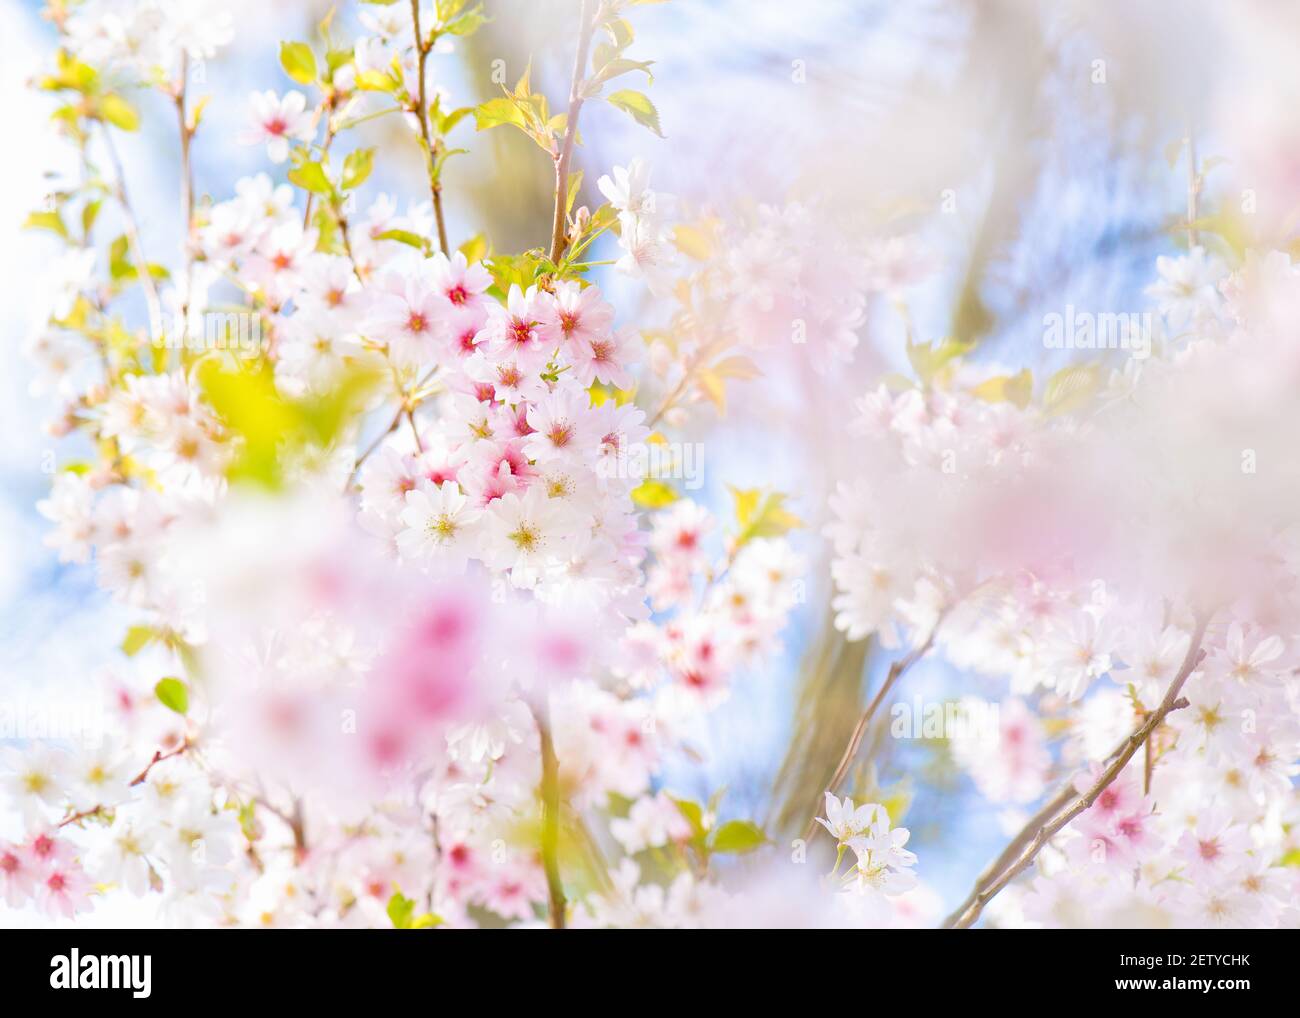 A beautiful, fresh, close-up of Japanese cherry Spring blossom with blue sky and clouds visible through the branches on a bright day. Stock Photo